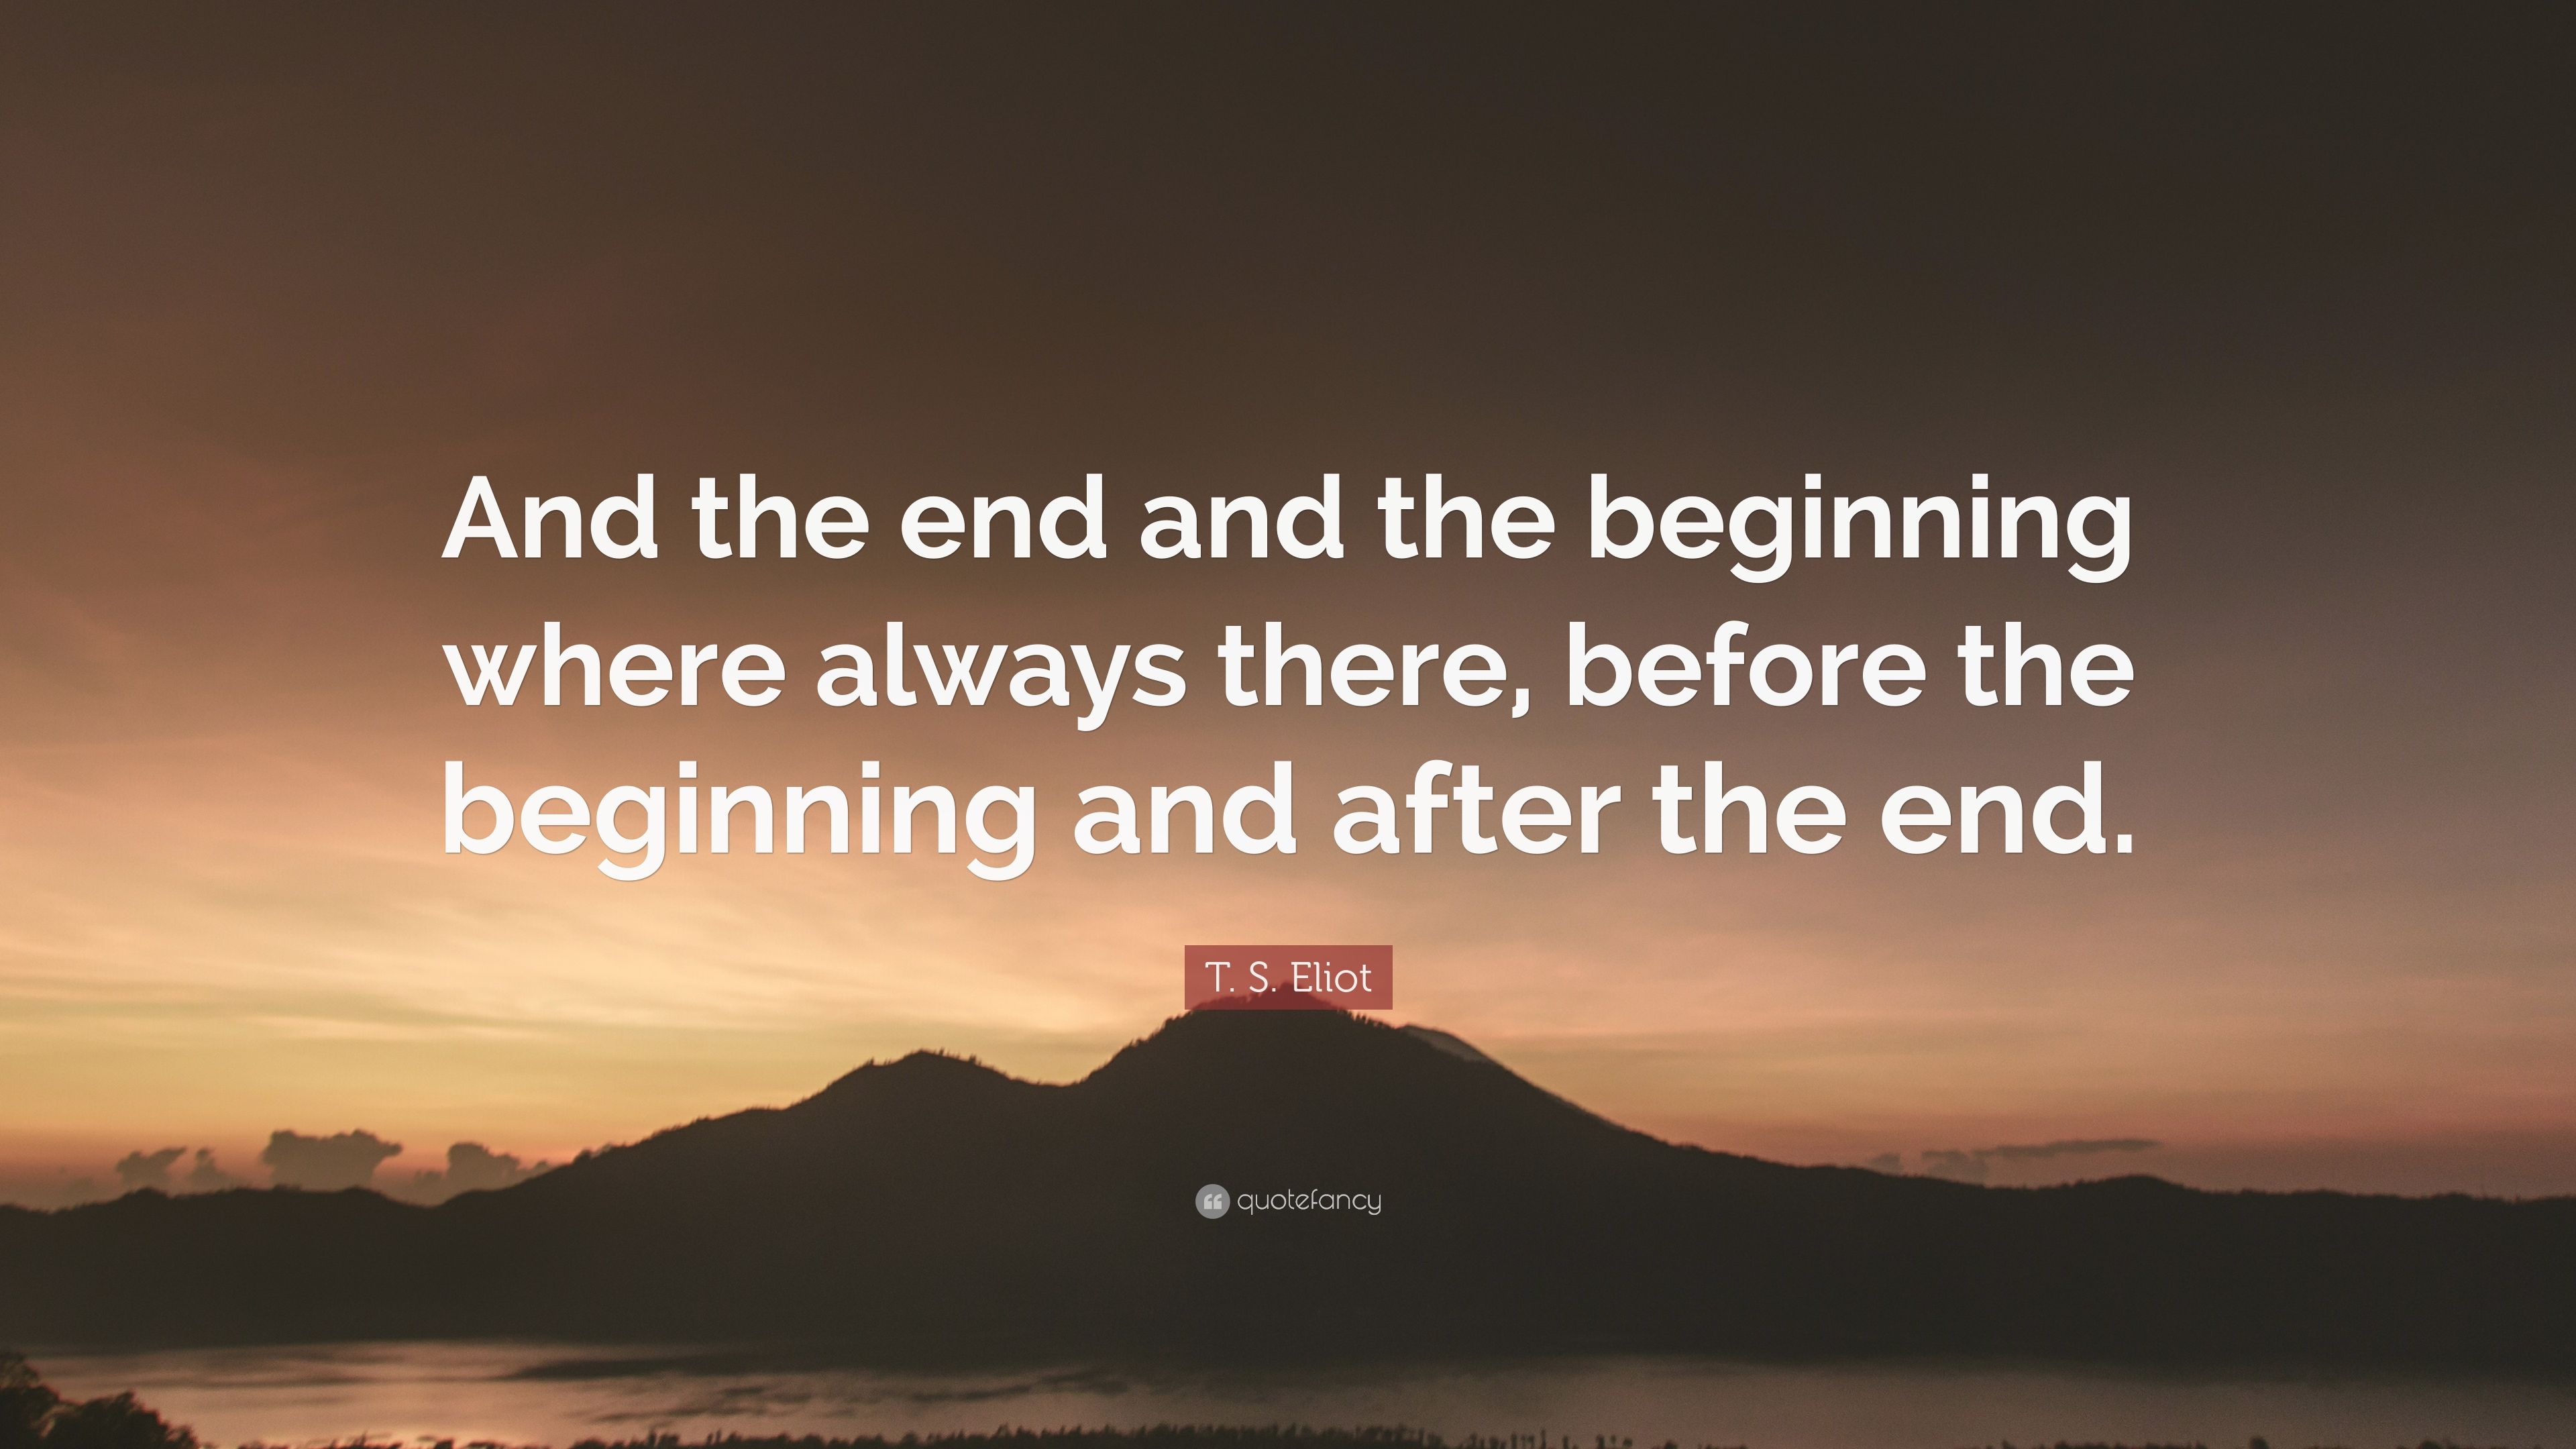 T. S. Eliot Quote: “And the end and the beginning where always